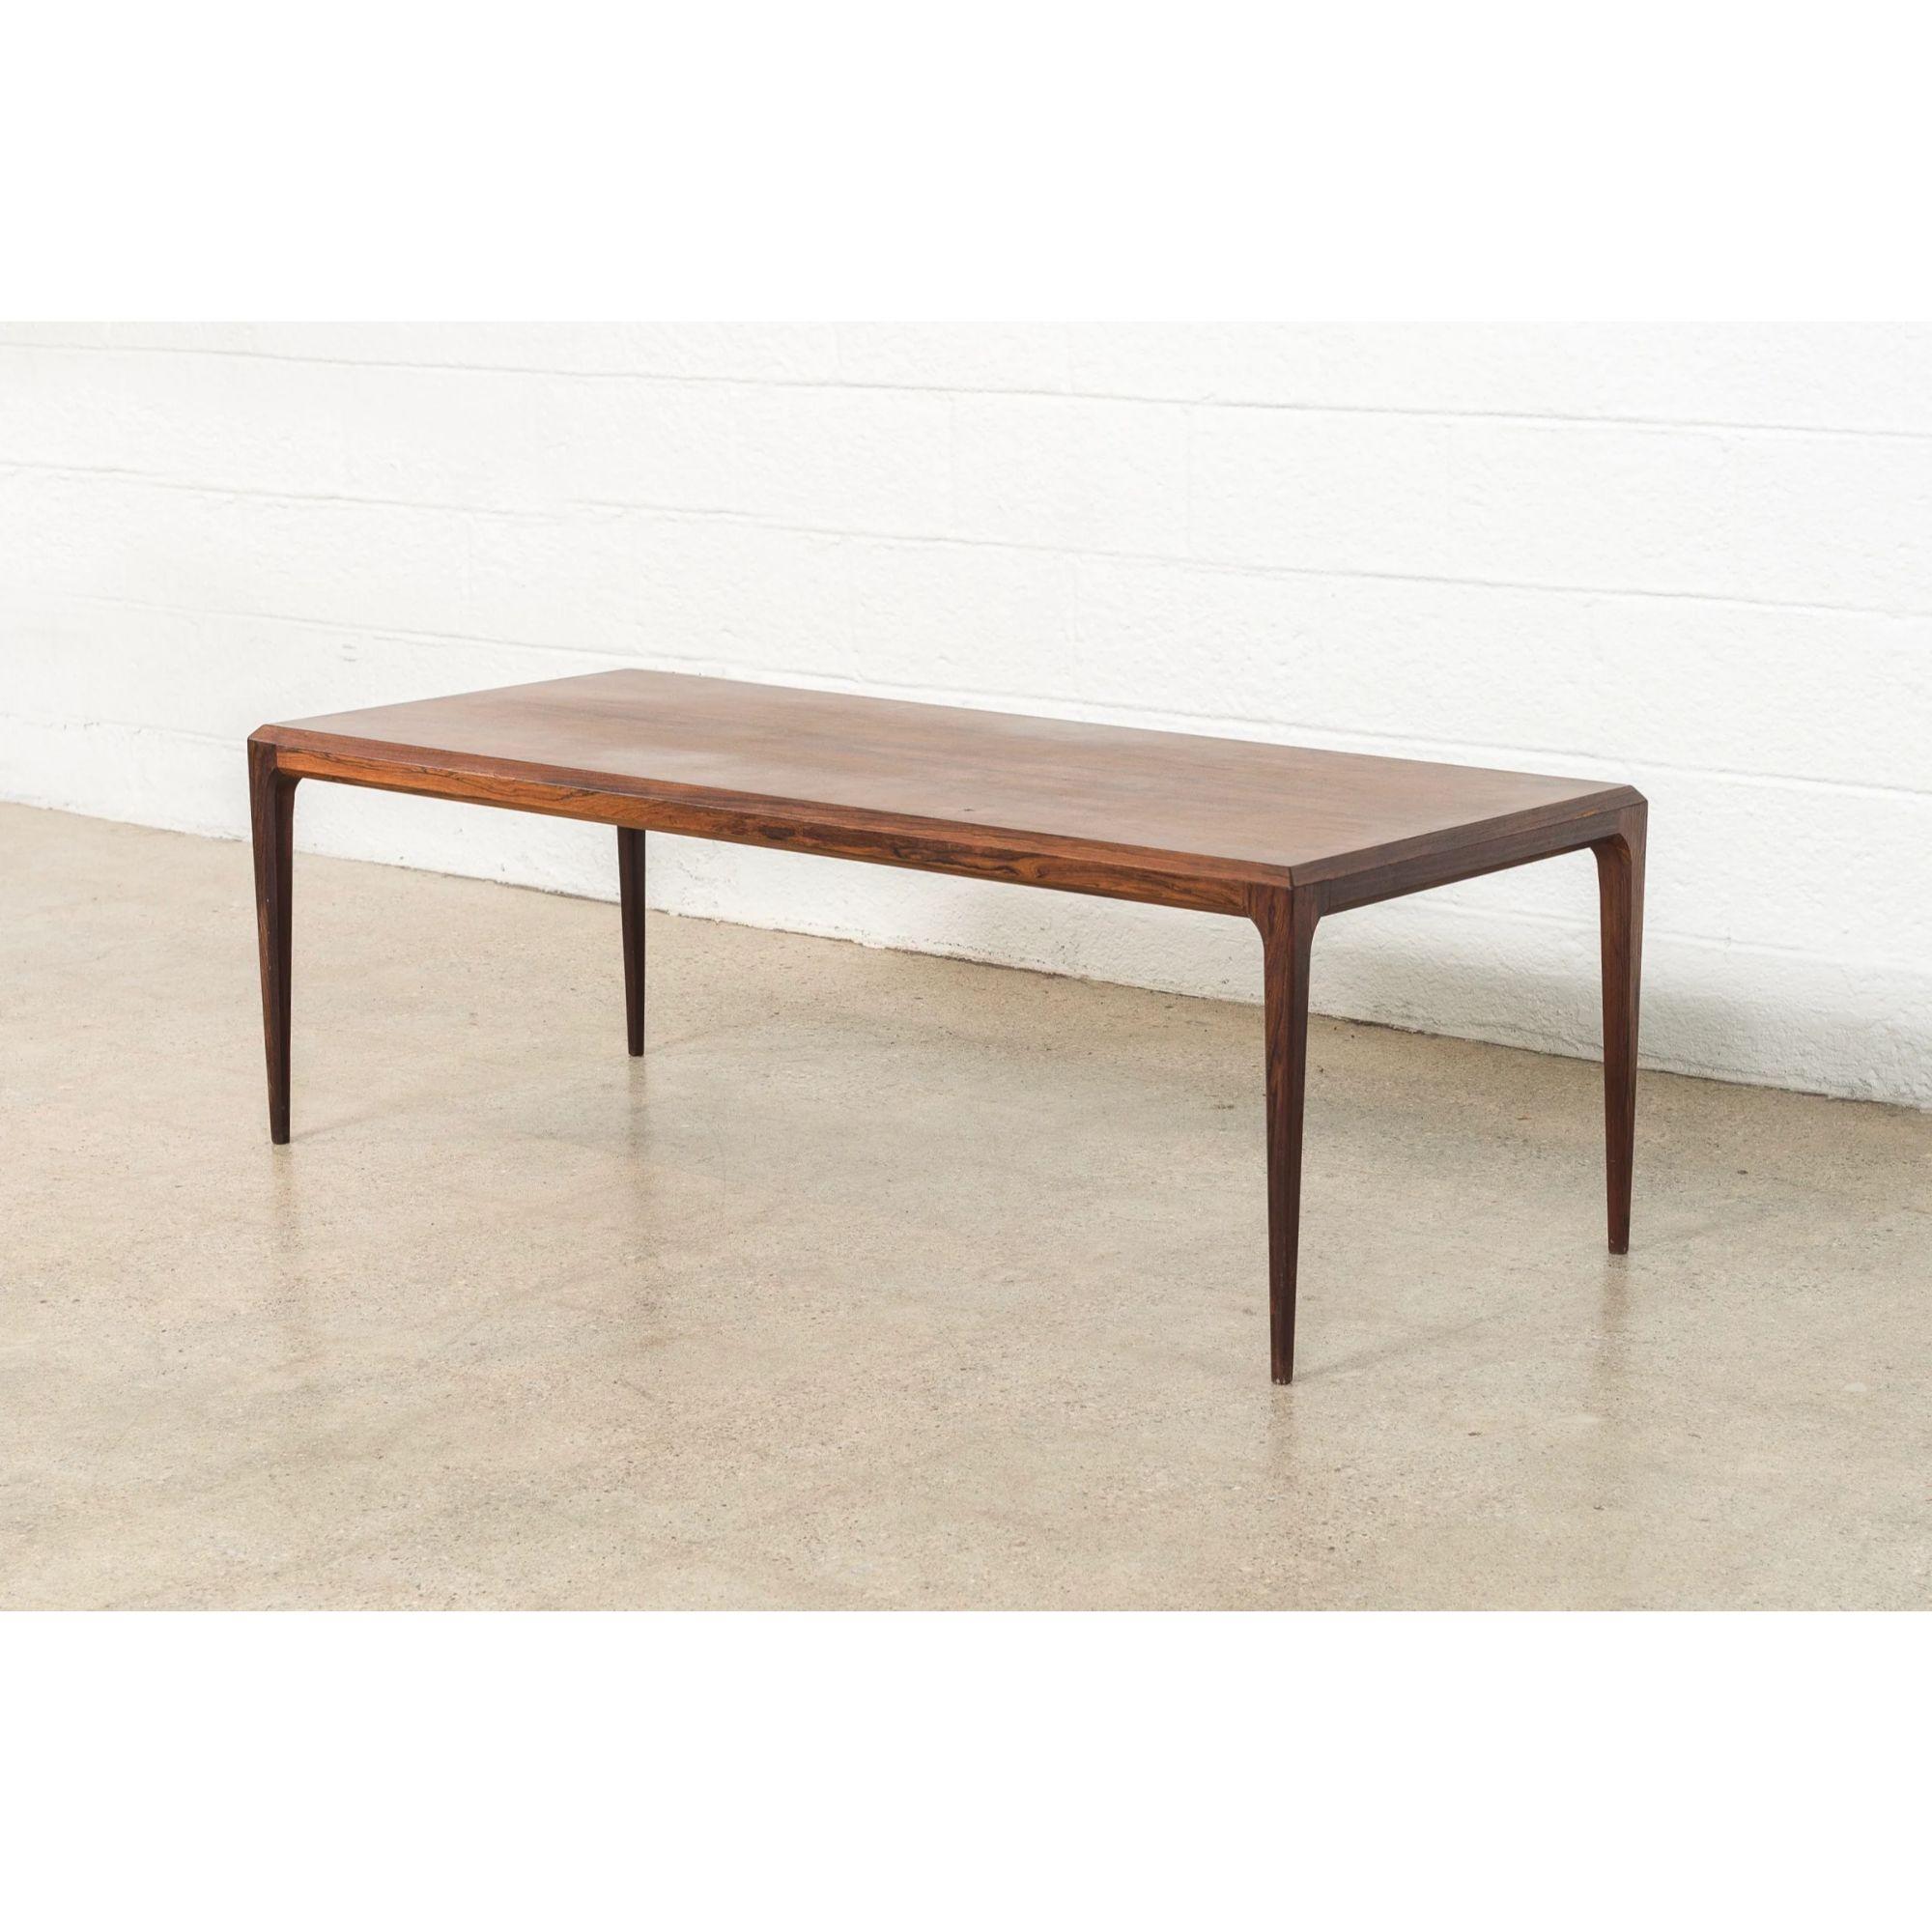 20th Century Danish Modern Coffee Table in Rosewood by Johannes Andersen, 1960s For Sale